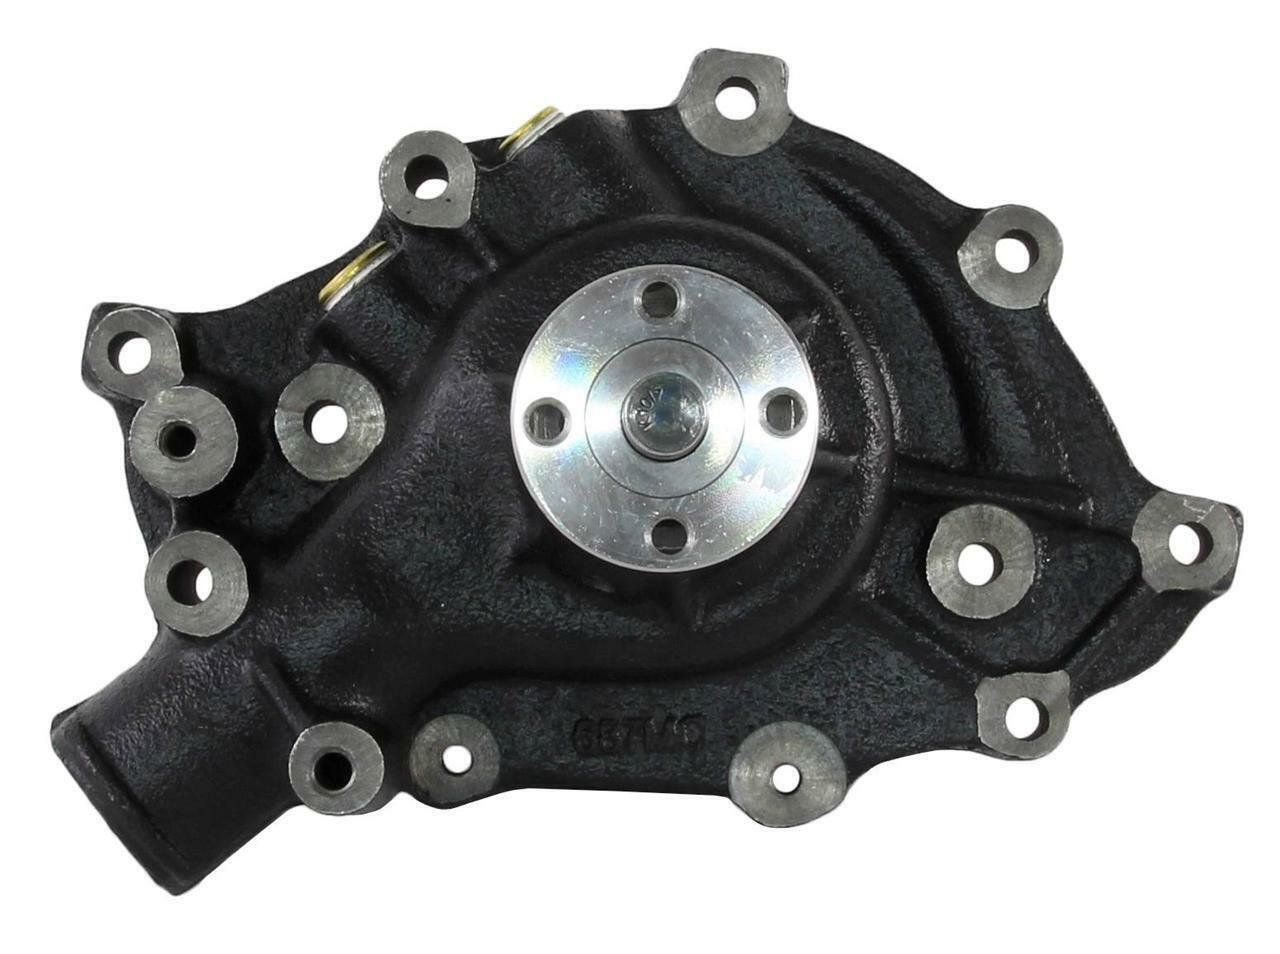 NEW WATER PUMP FORD MARINE SMALL free BLOCK 351 302 ENGINES 289 OM V8 Outlet ☆ Free Shipping